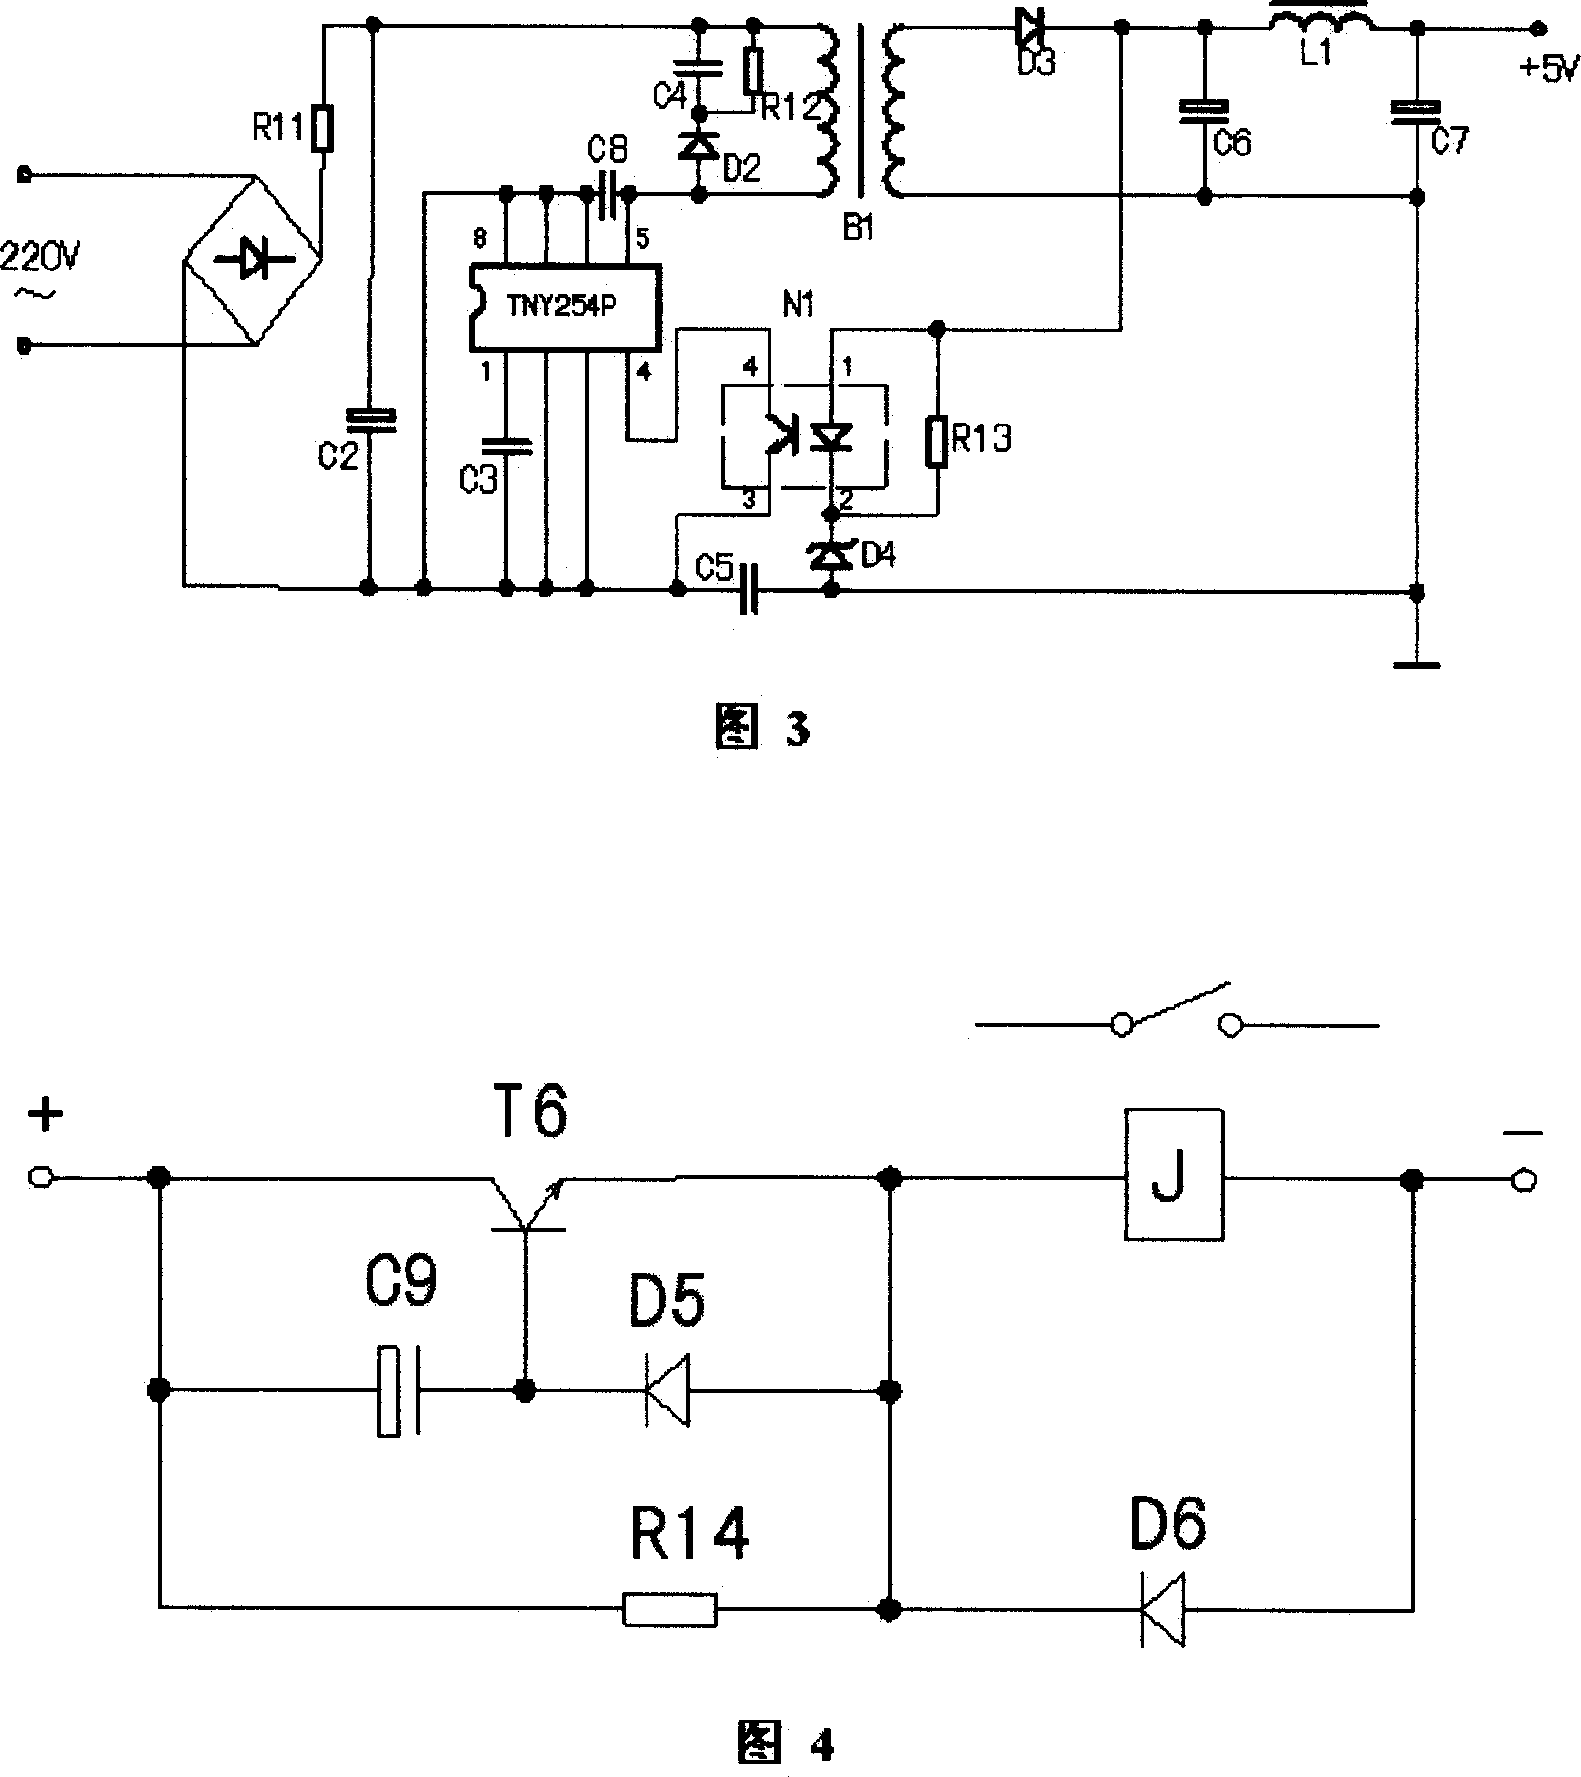 Waiting electric saving method for remote controlled domestic electric equipment and use device